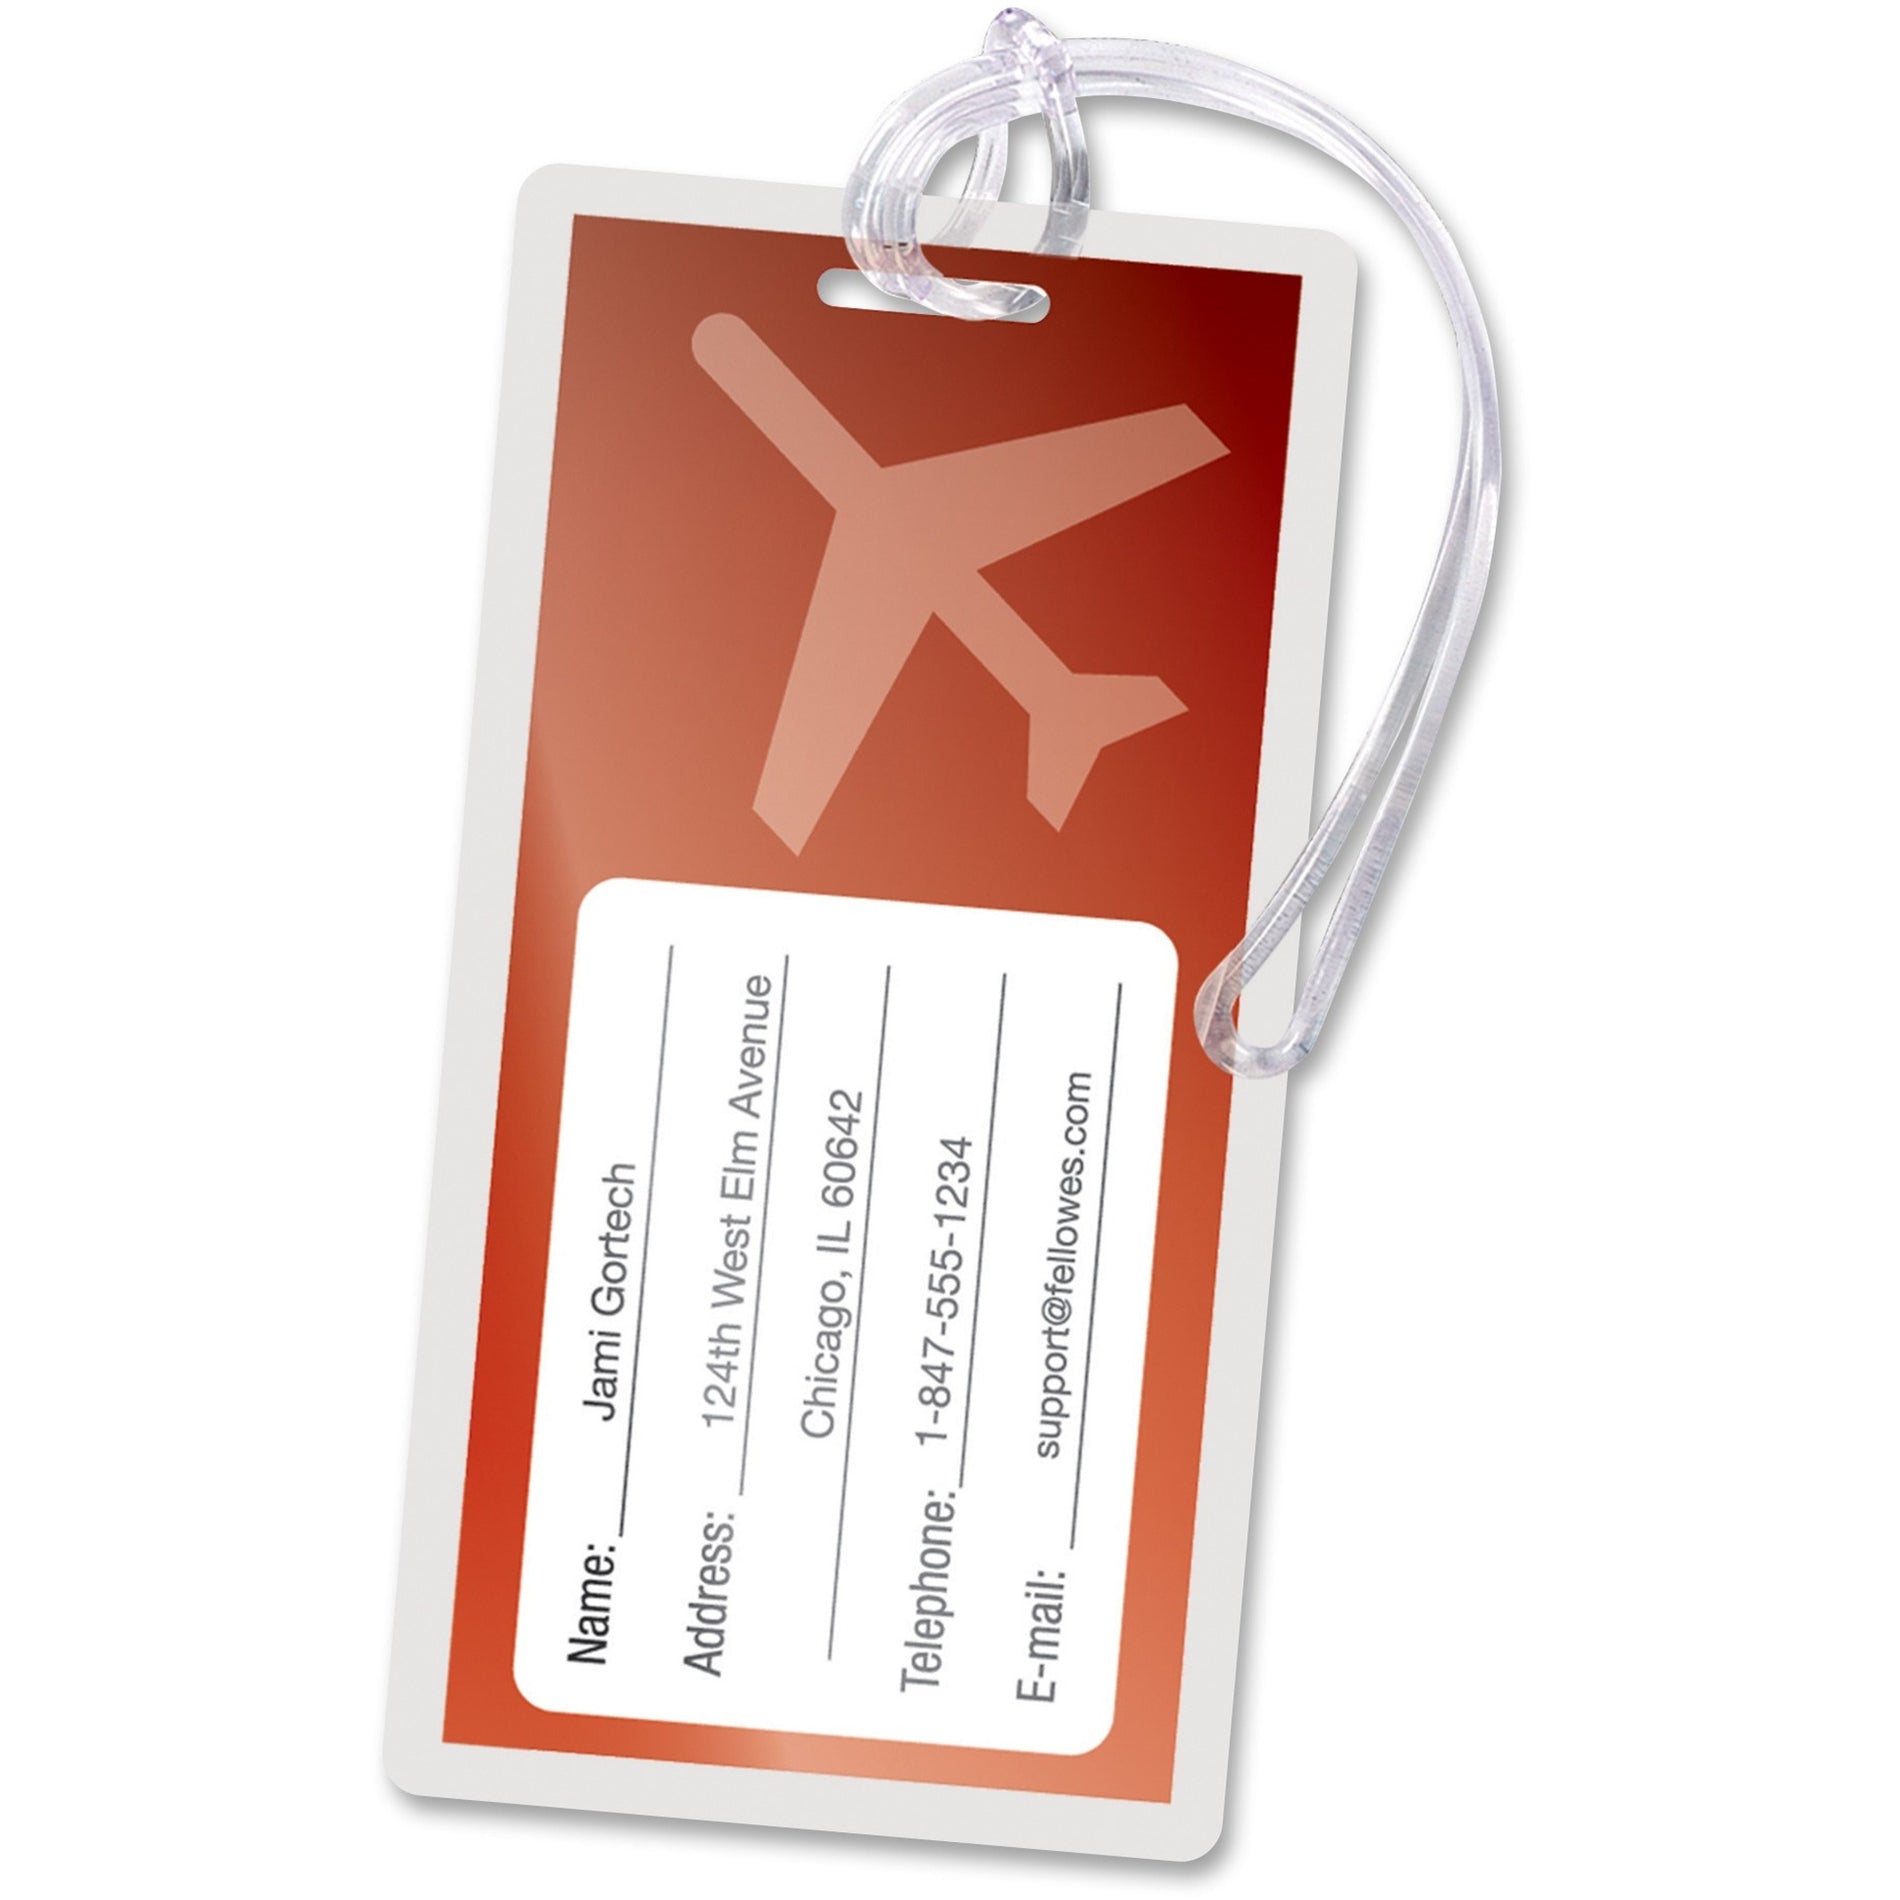 Fellowes 52034 Luggage Tag Glossy Laminating Pouches, Durable, Clear, 5 mil Thickness, 50/Pack